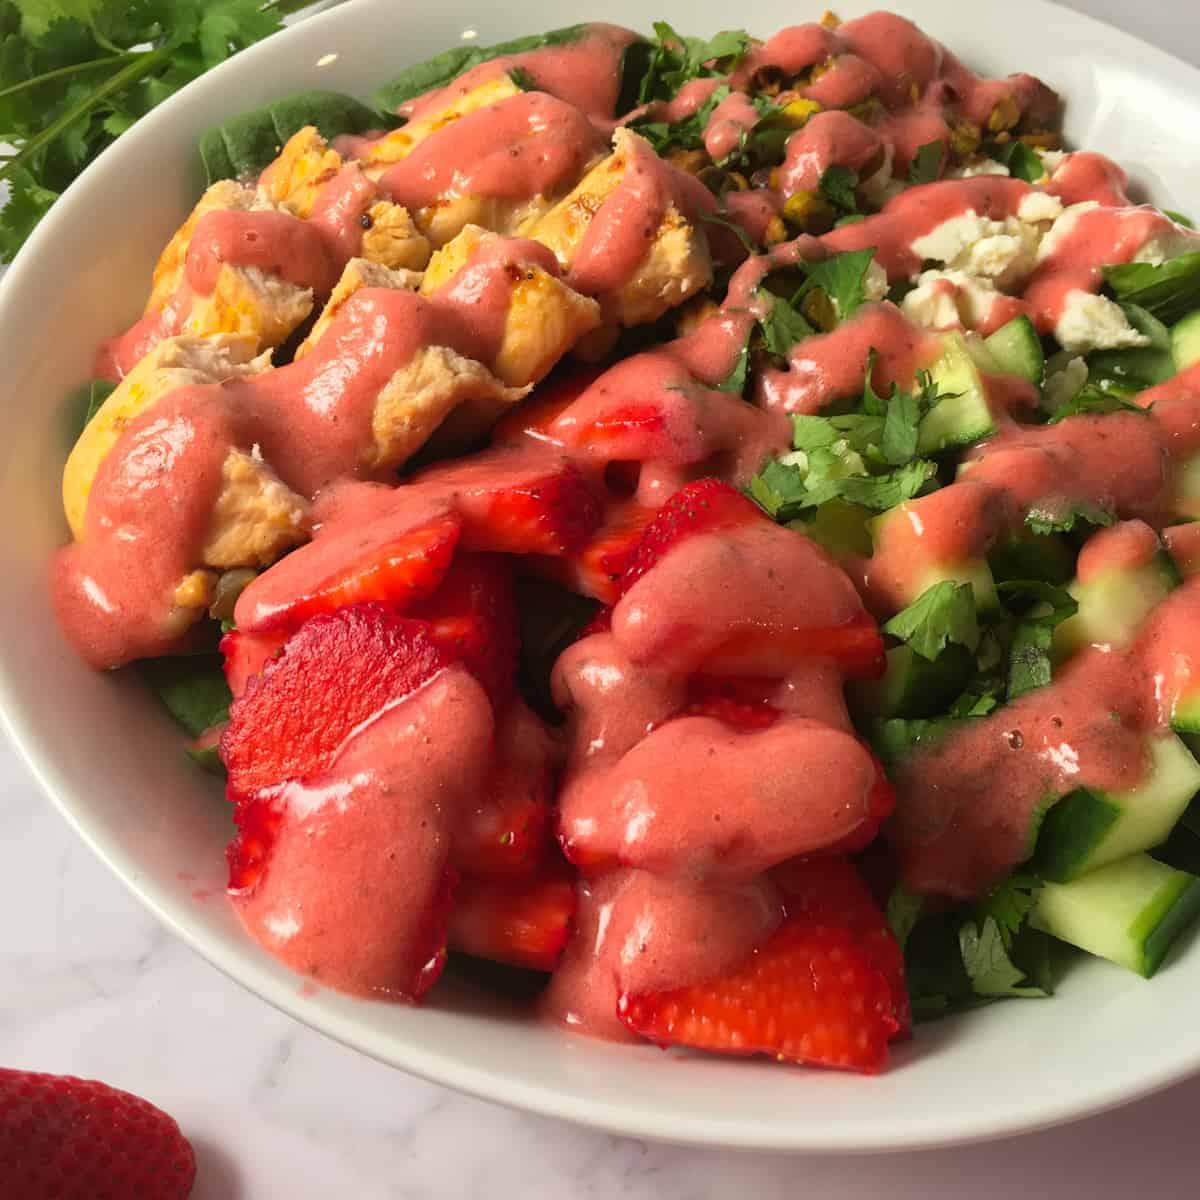 A bowl of salad with strawberries and dressing.